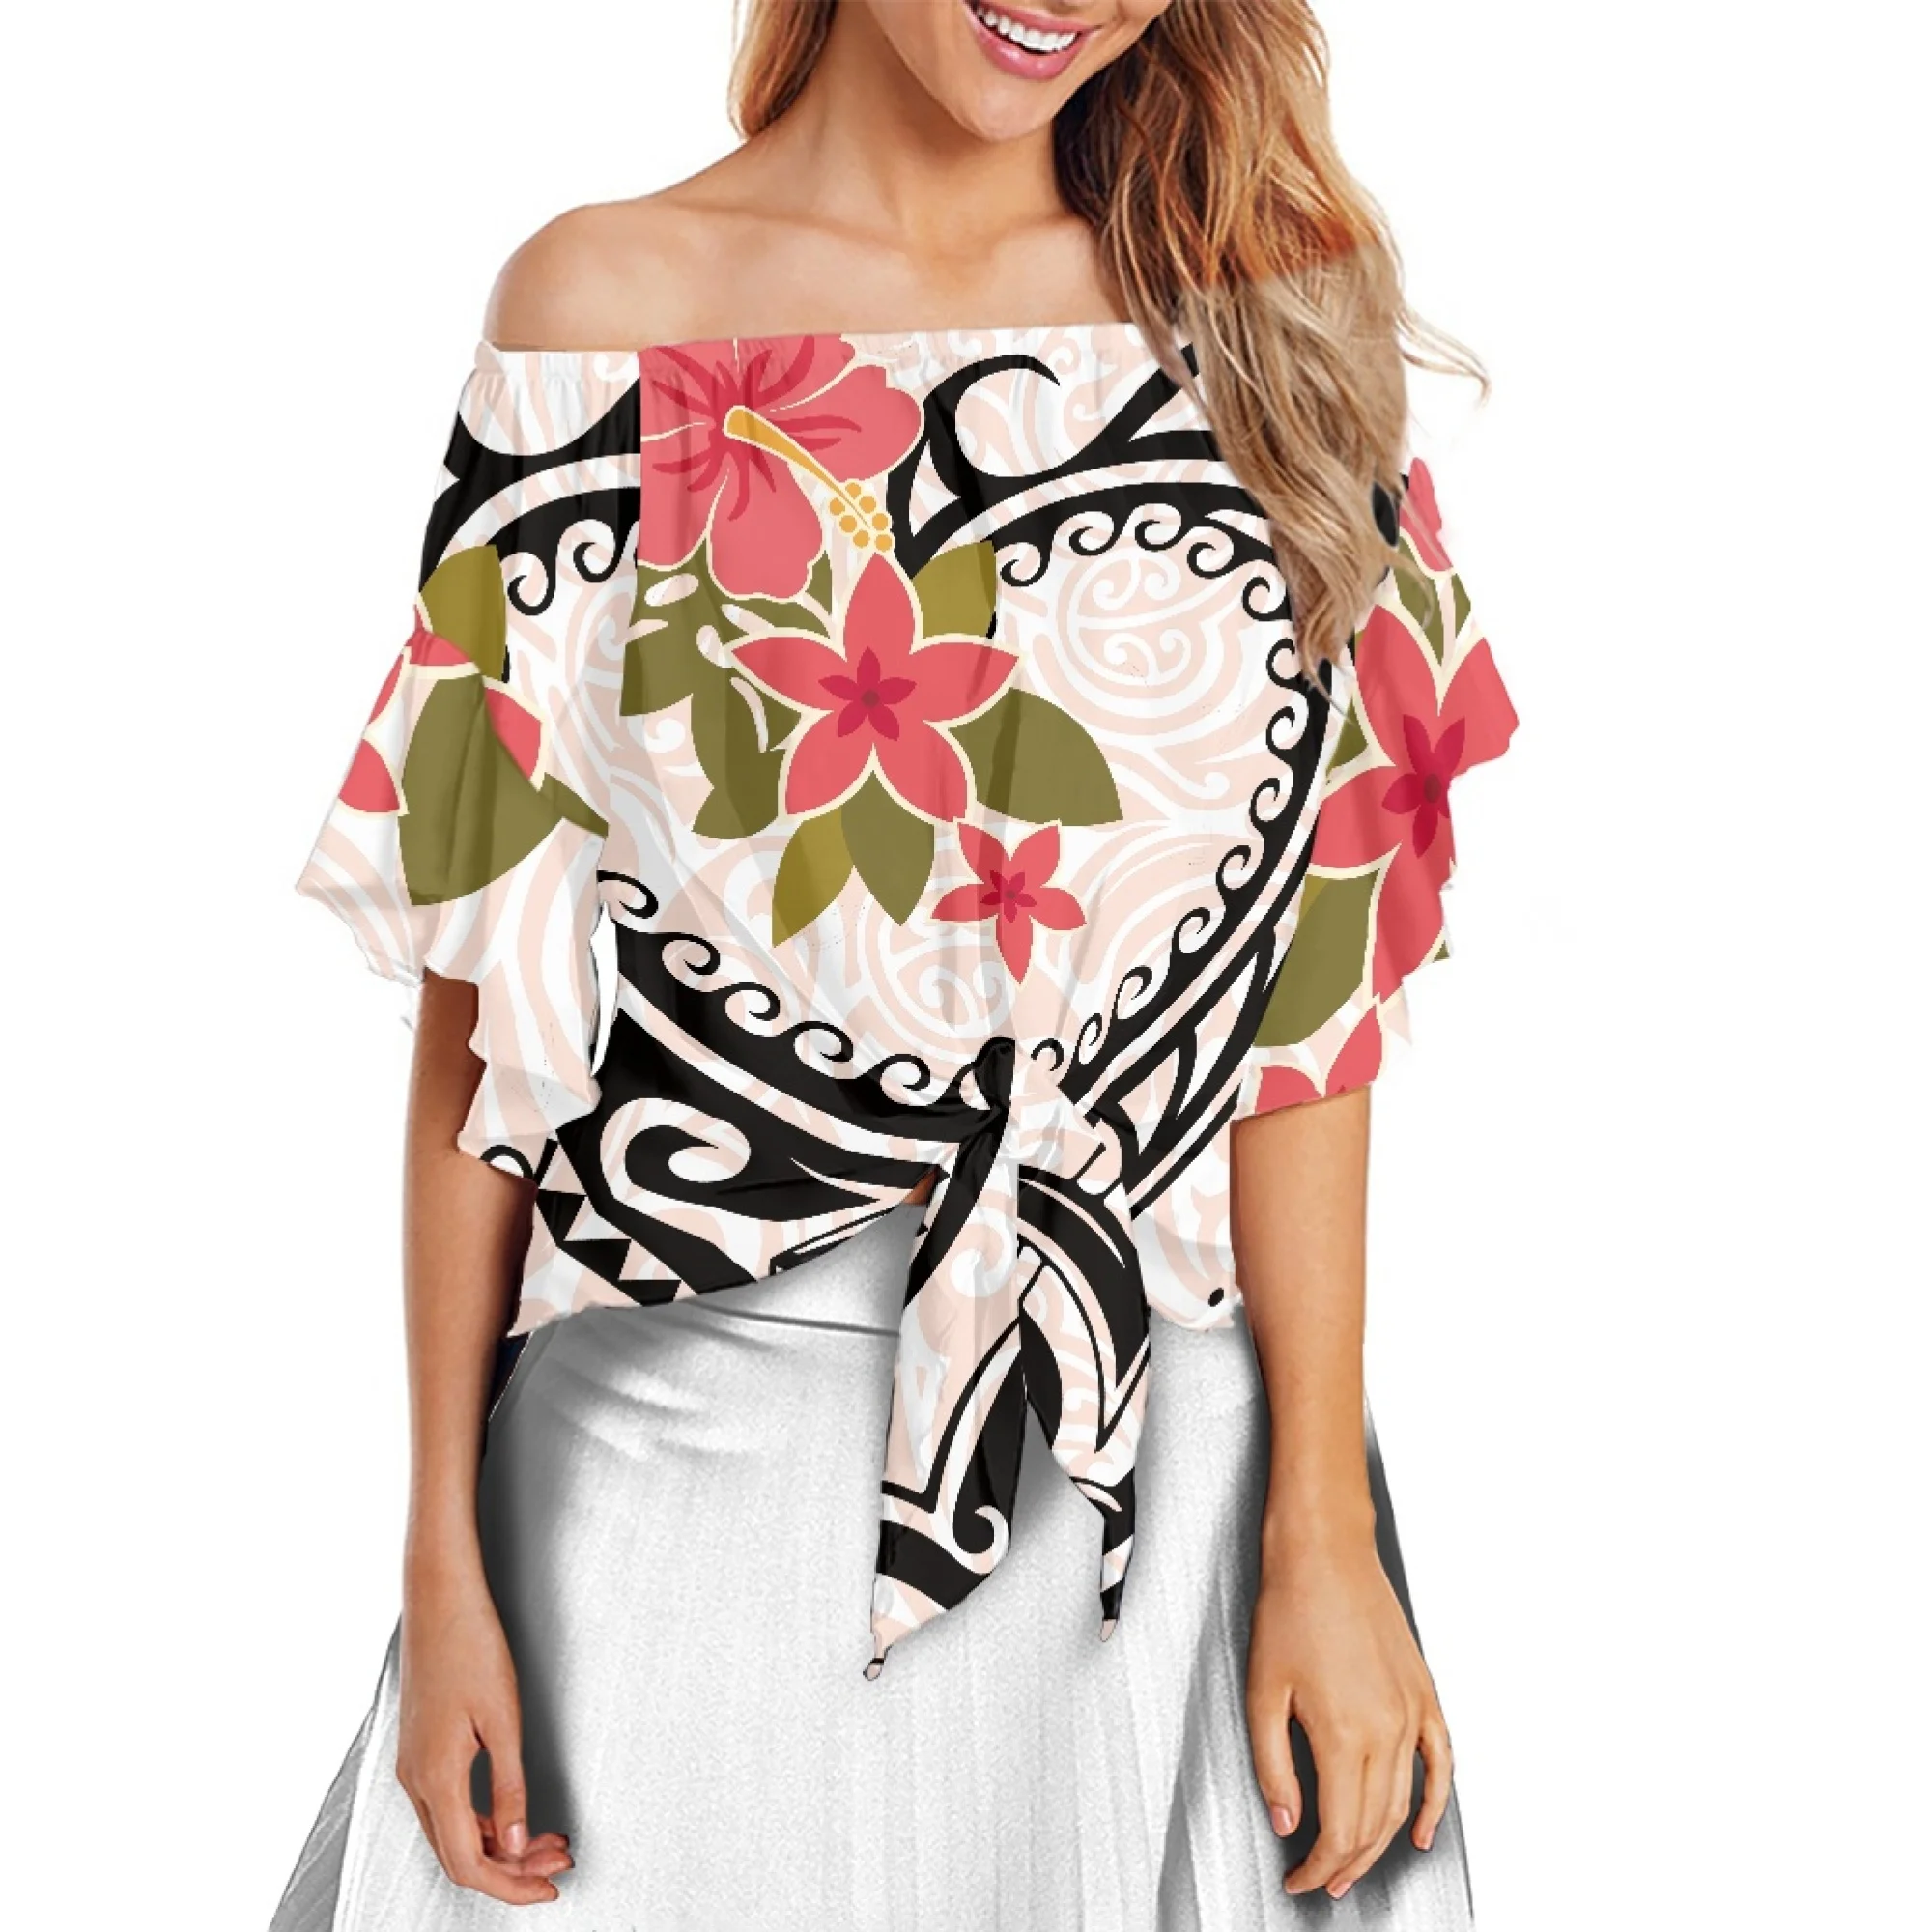 

Fashion Chiffon Shirts With Hawaiian Frangeria Pattern And Ethnic Style Off-The-Shoulder Tie Knot Are Hot Sellers This Summer